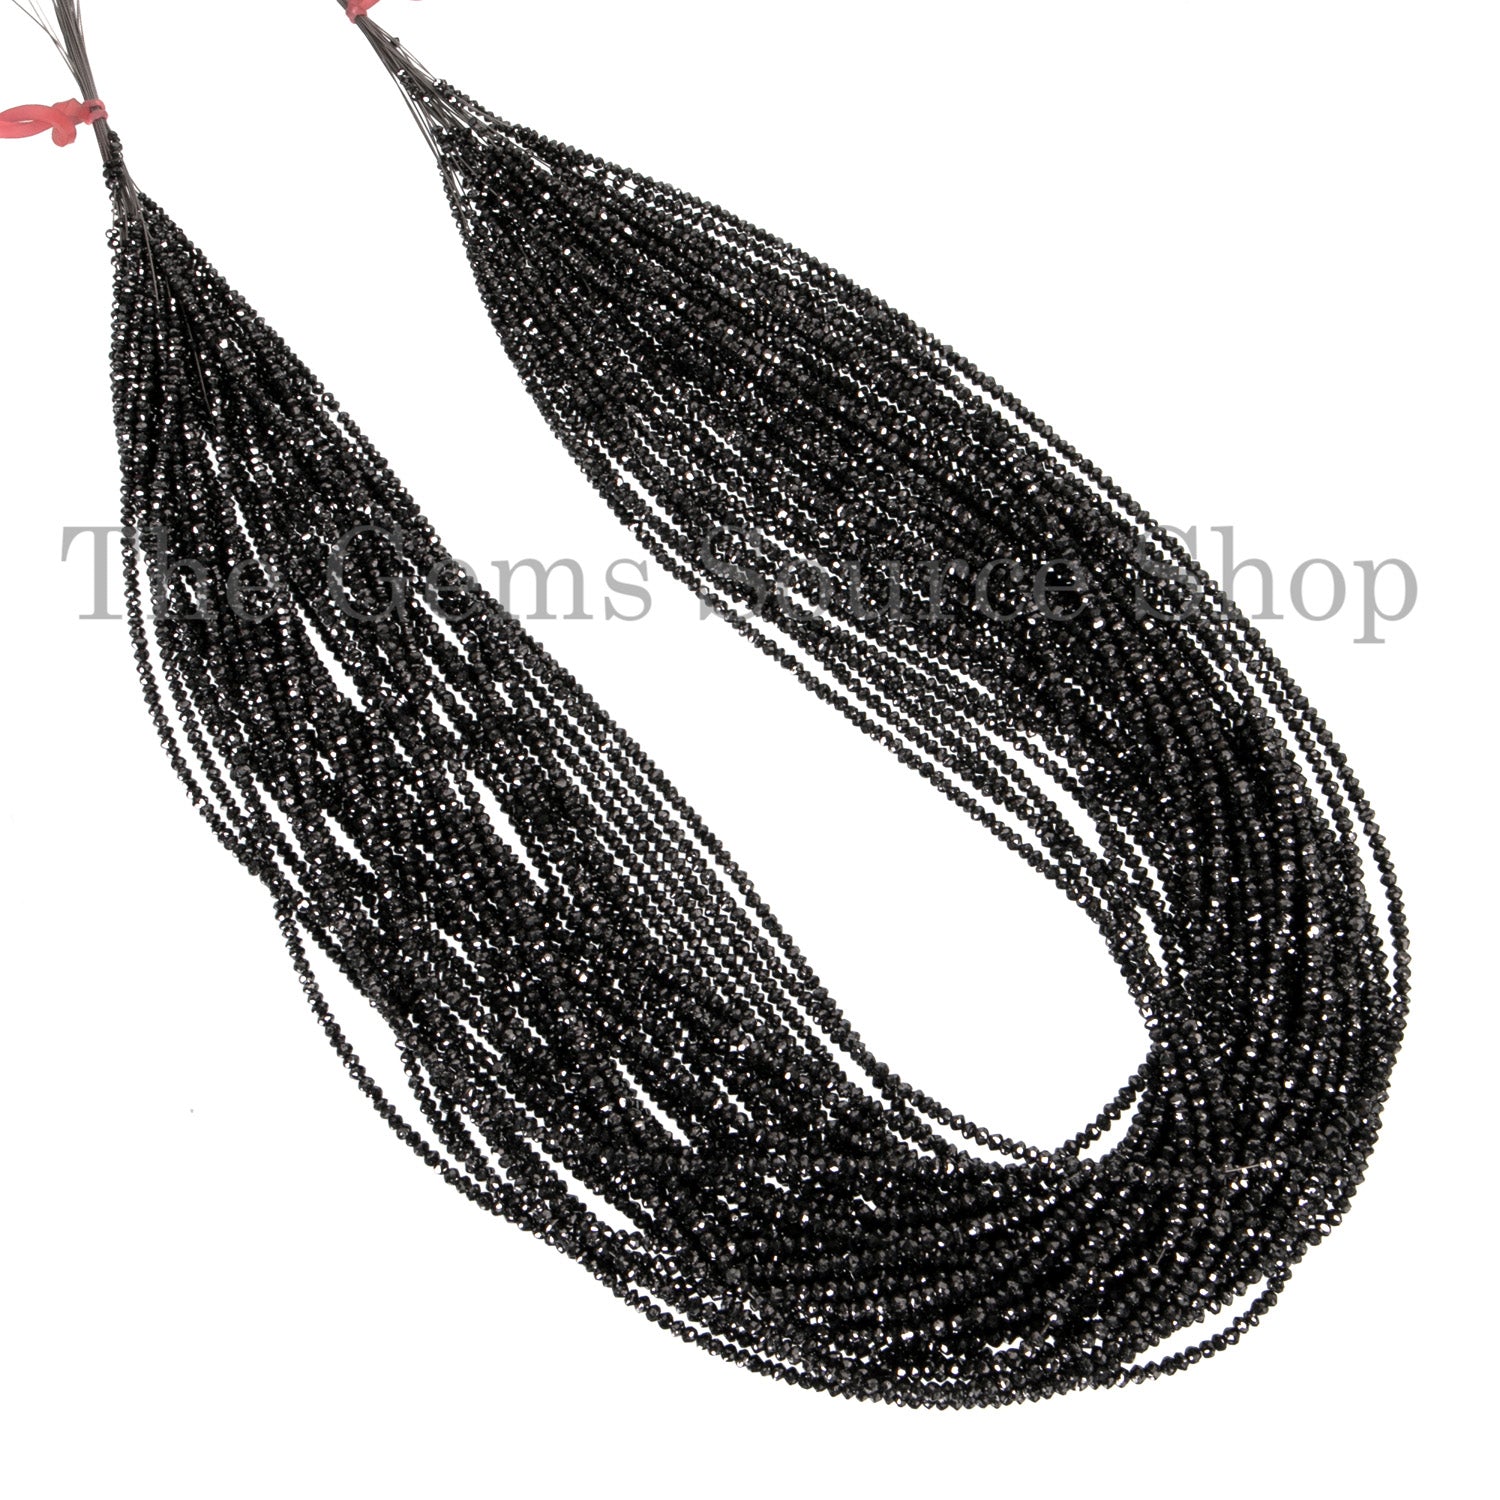 Top Quality Black Diamond Beads Faceted Rondelle, Black Diamond Beads, Natural Diamond Beads